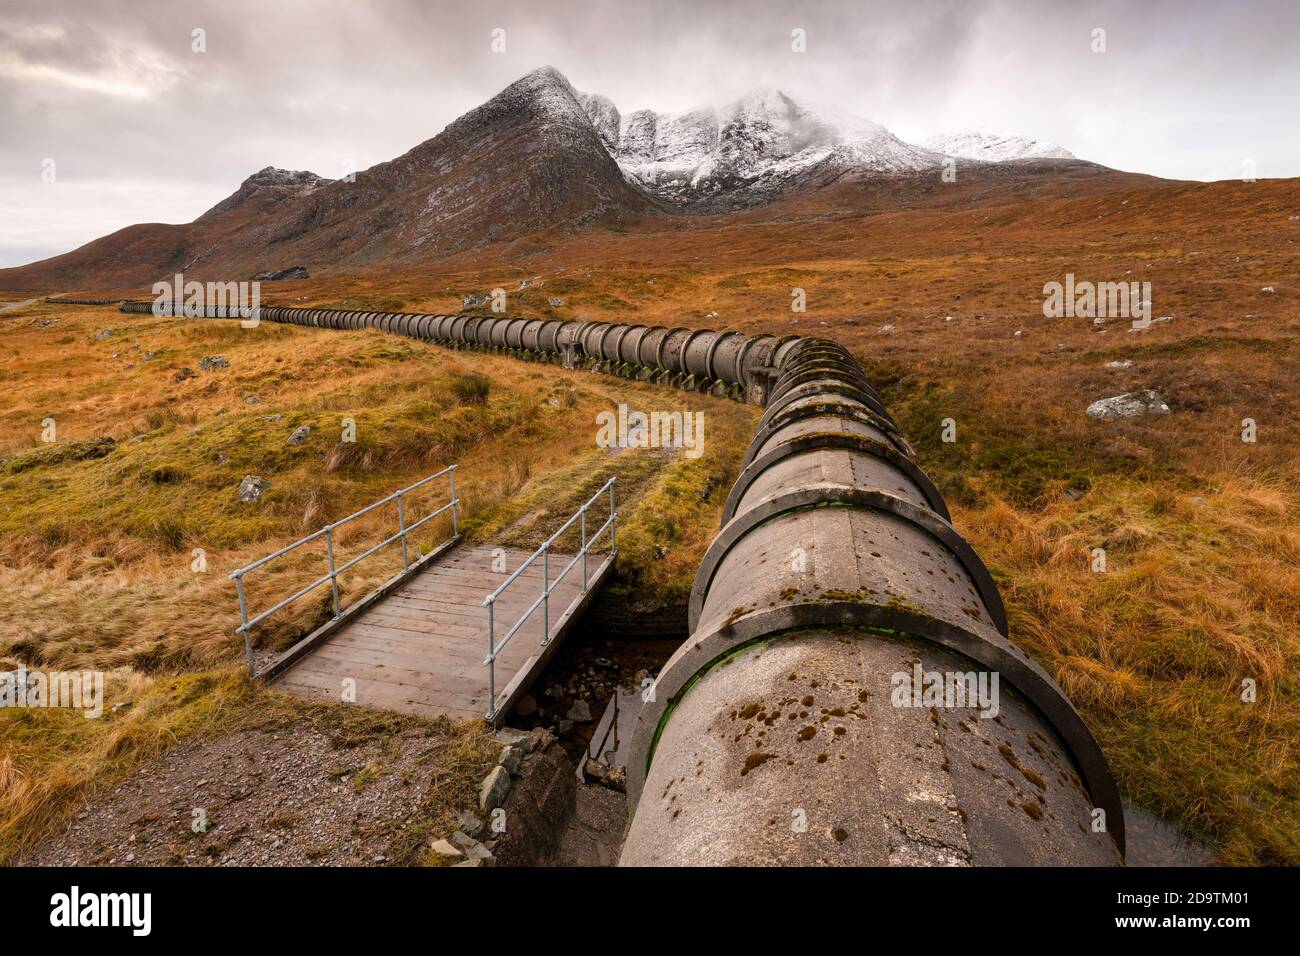 Original concrete pipe / aqueduct taking water into Loch Fannich, Highland Scotland, as part of the hydro-electric scheme in that area. Stock Photo